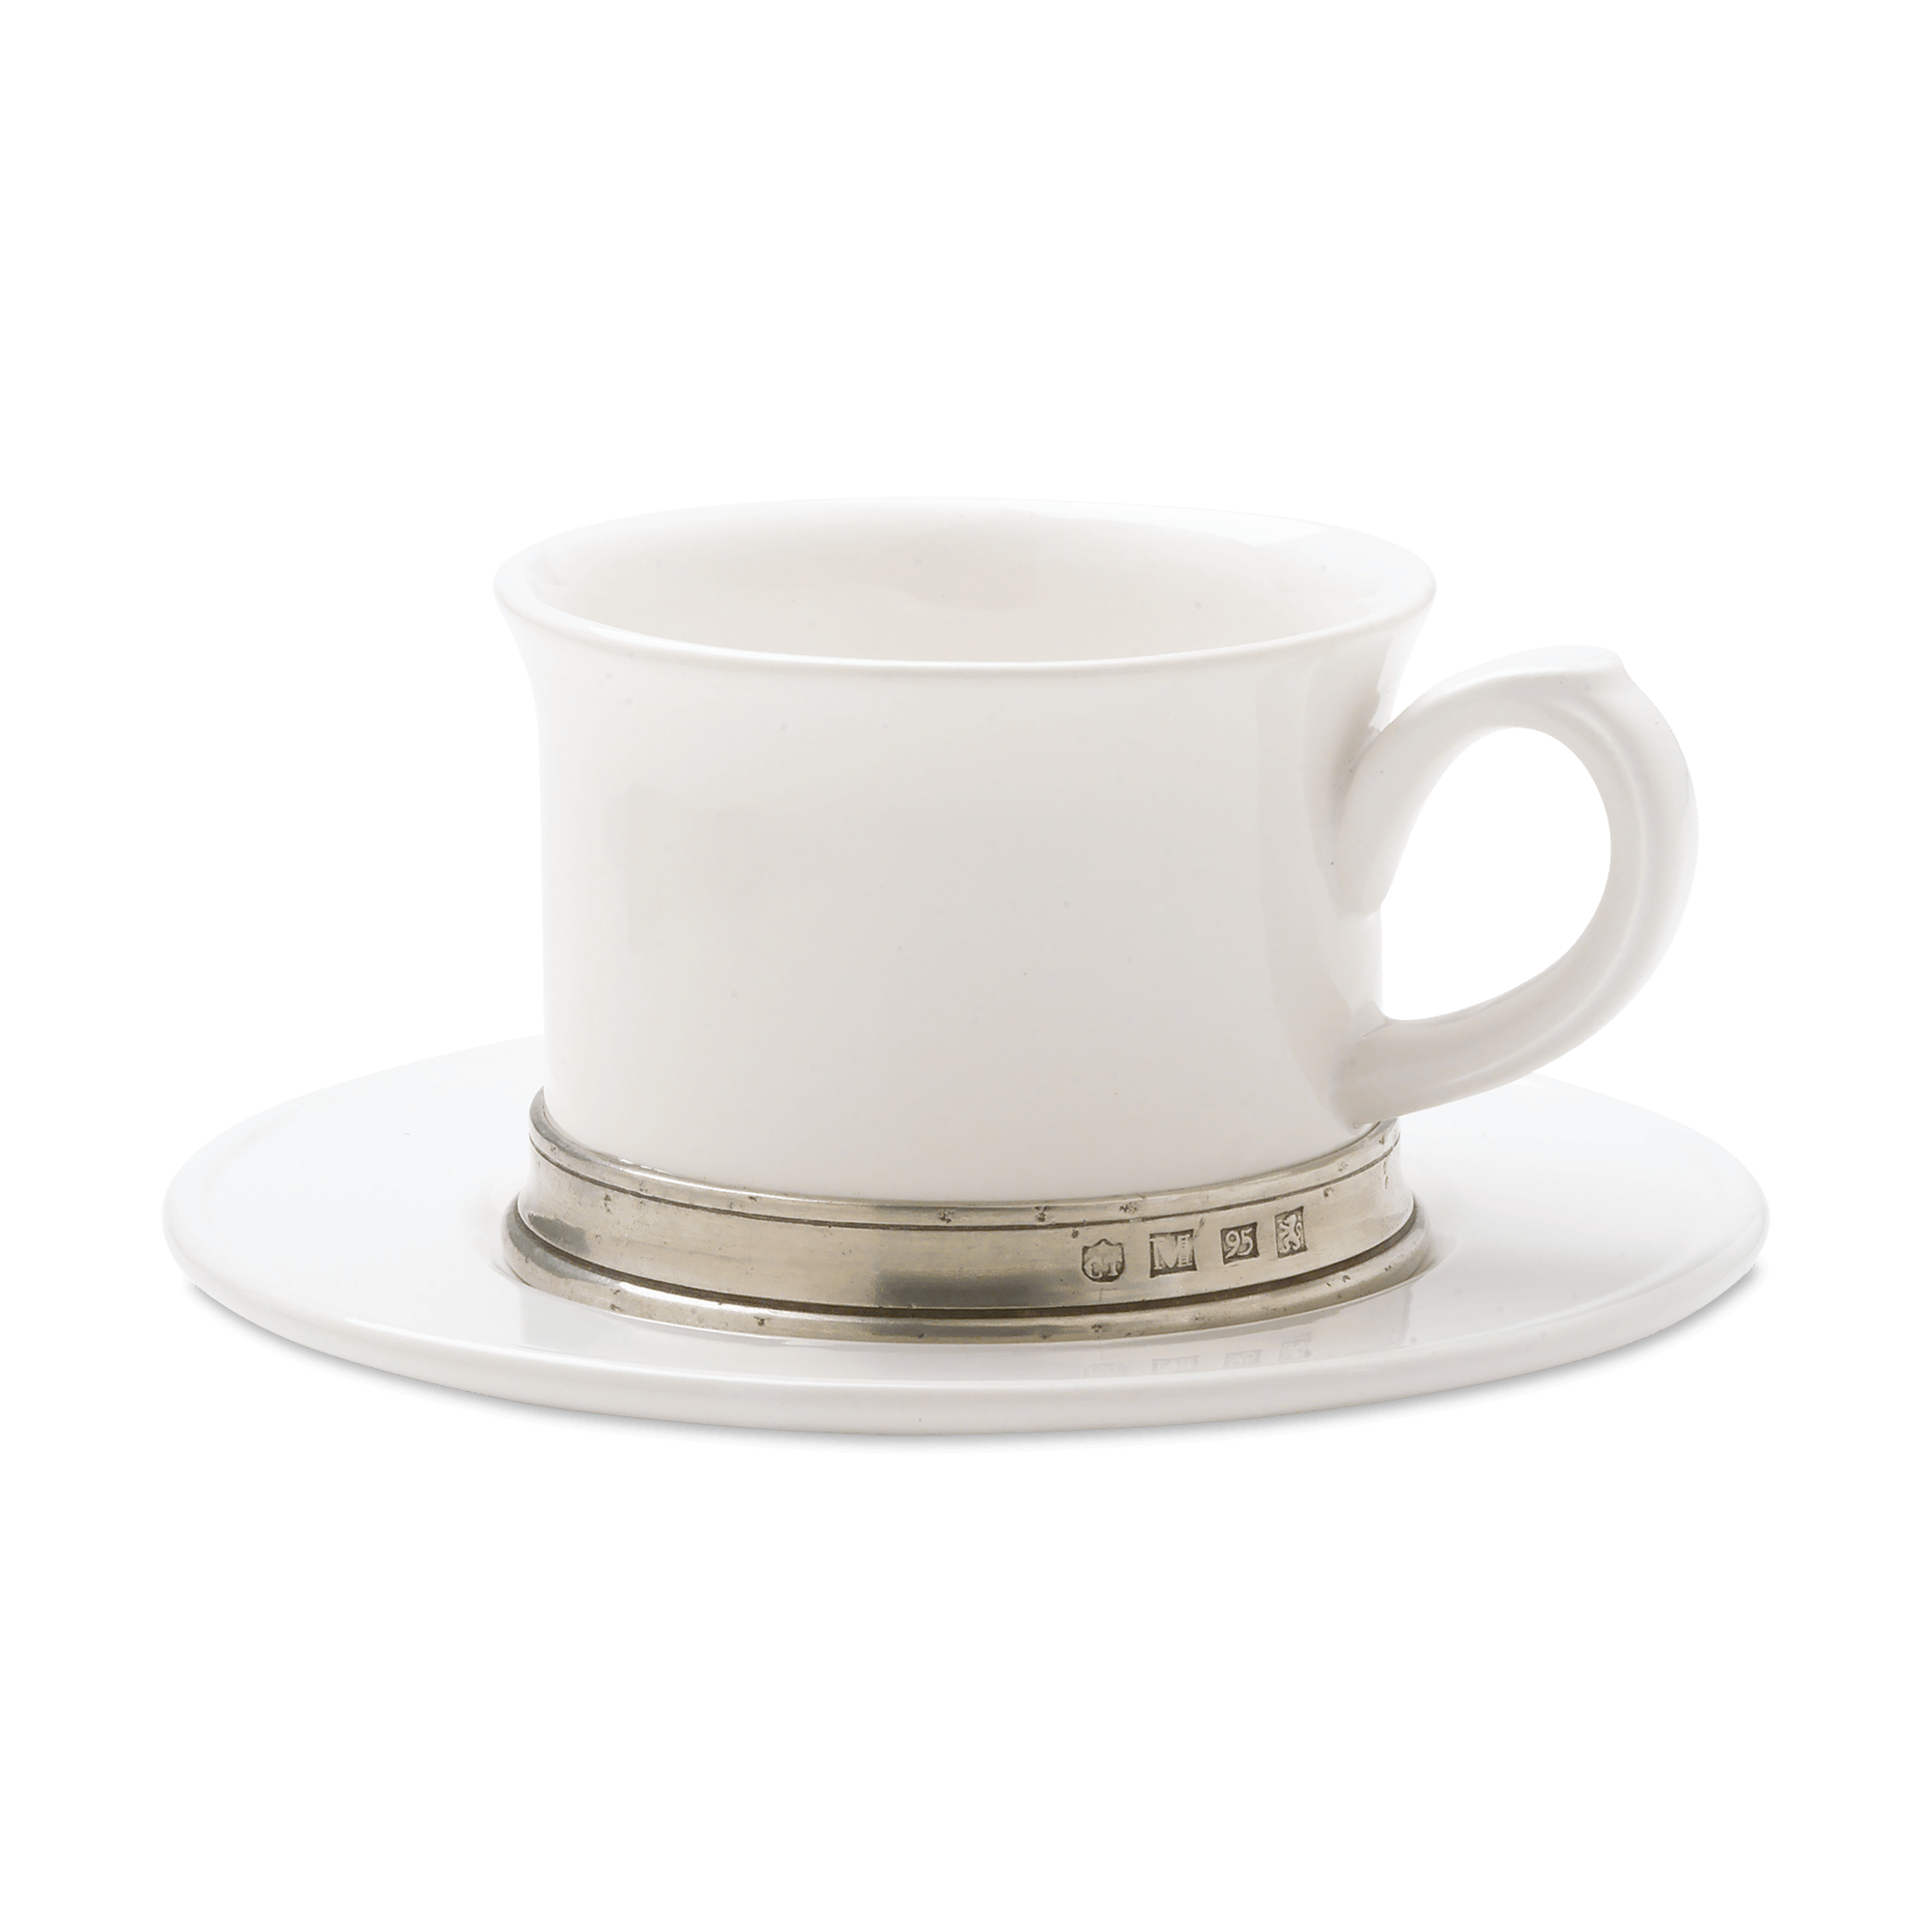 Limone Espresso Cup with Saucer - Italian Pottery Outlet